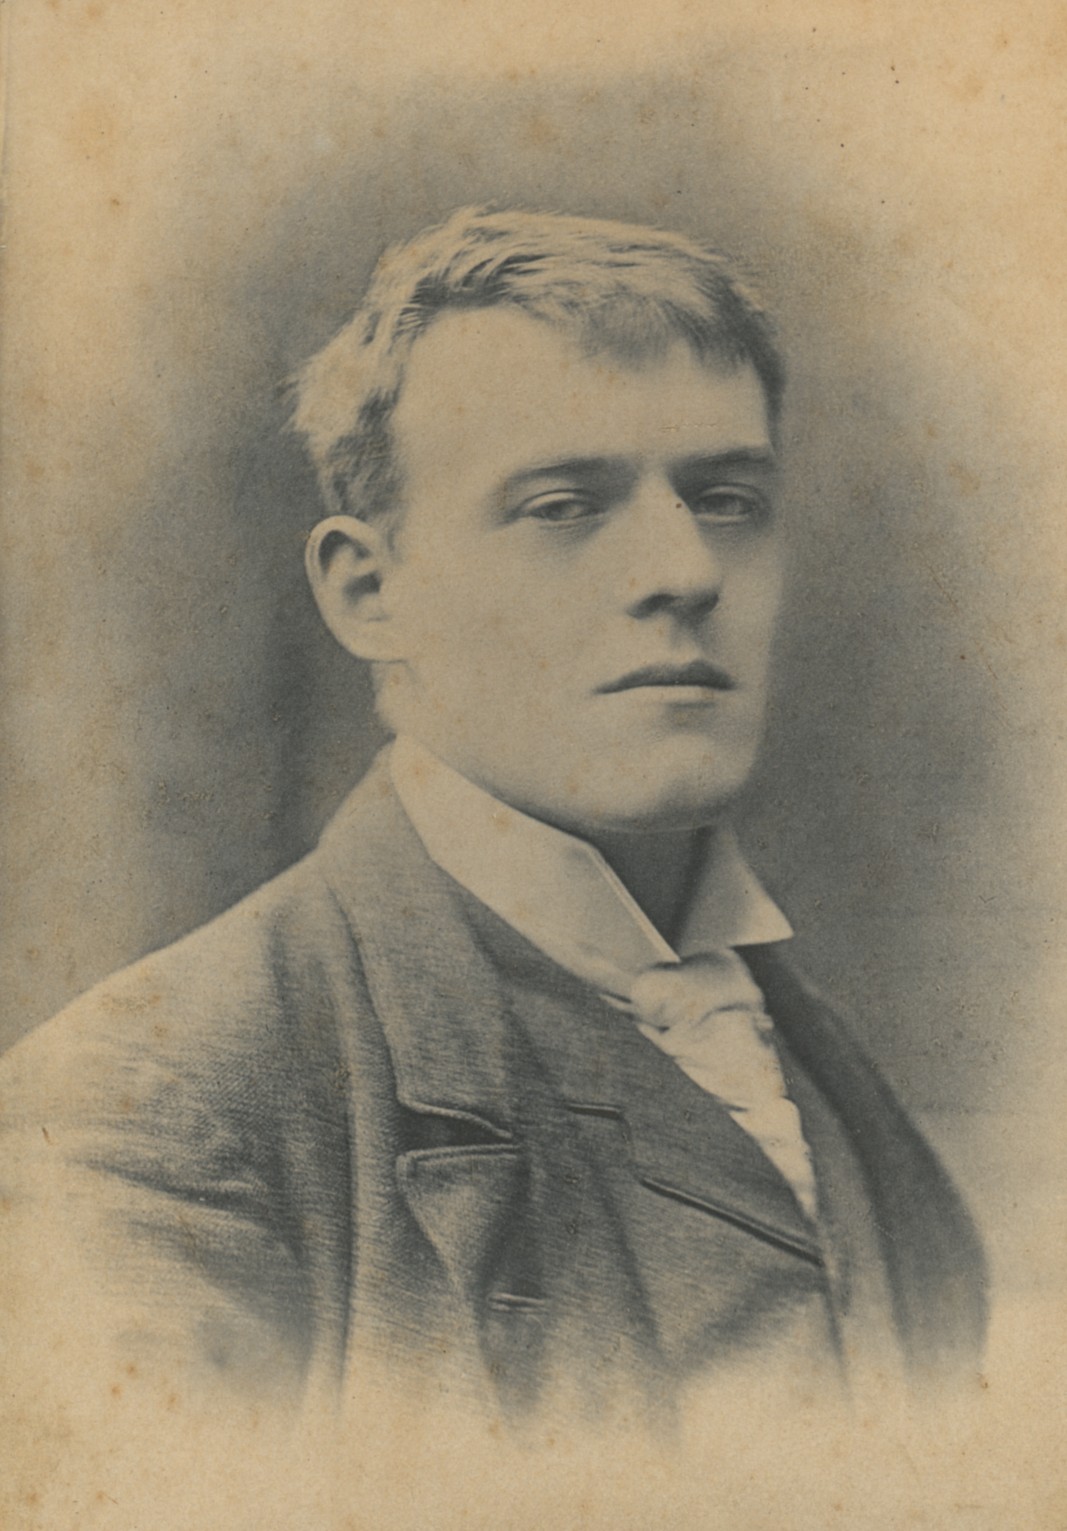 English writer Joseph Hilaire Peter Belloc was born in Celle Saint-Cloud, France in 1870. His mother was an English citizen, and the family moved to England ... - ms1998-004-221ahbelloc